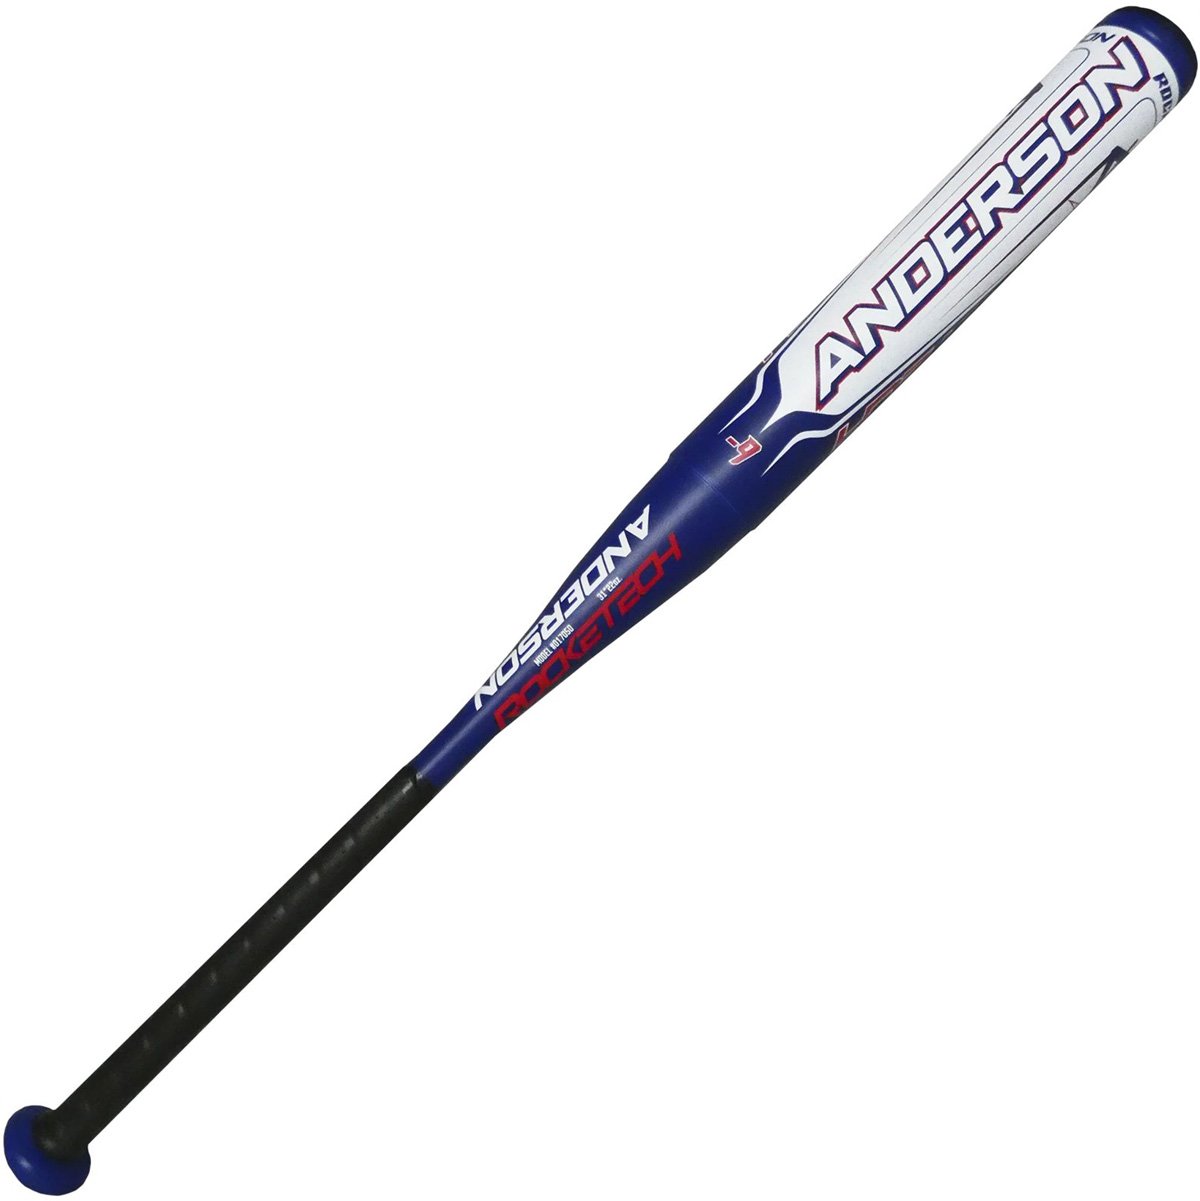 anderson-rocketech-2022-fastpitch-9-softball-bat-32-inch-23-oz 017050-3223 Anderson 854378000649 The Anderson Rocketech has spent almost two decades dominating the fastpitch